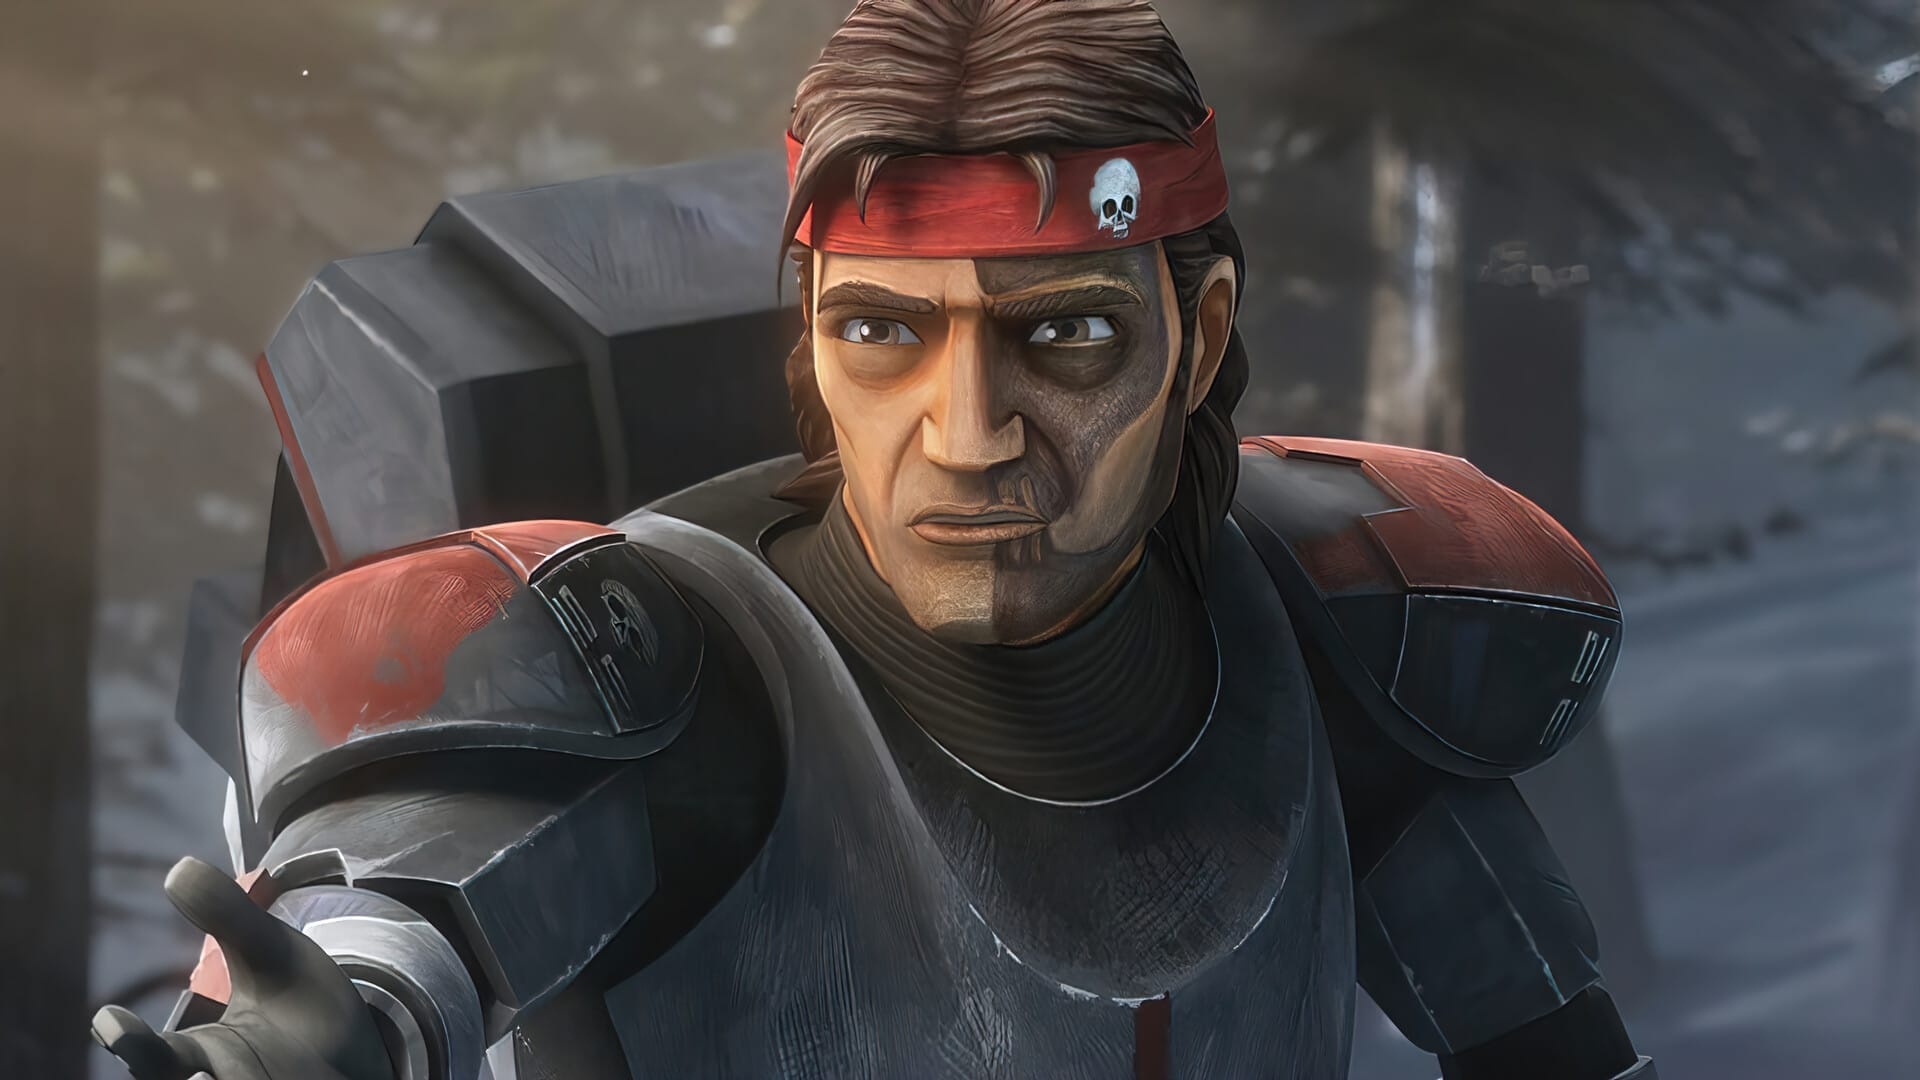 Star Wars: The Bad Batch: Hunter, The leader of the experimental unit Clone Force 99. 1920x1080 Full HD Wallpaper.